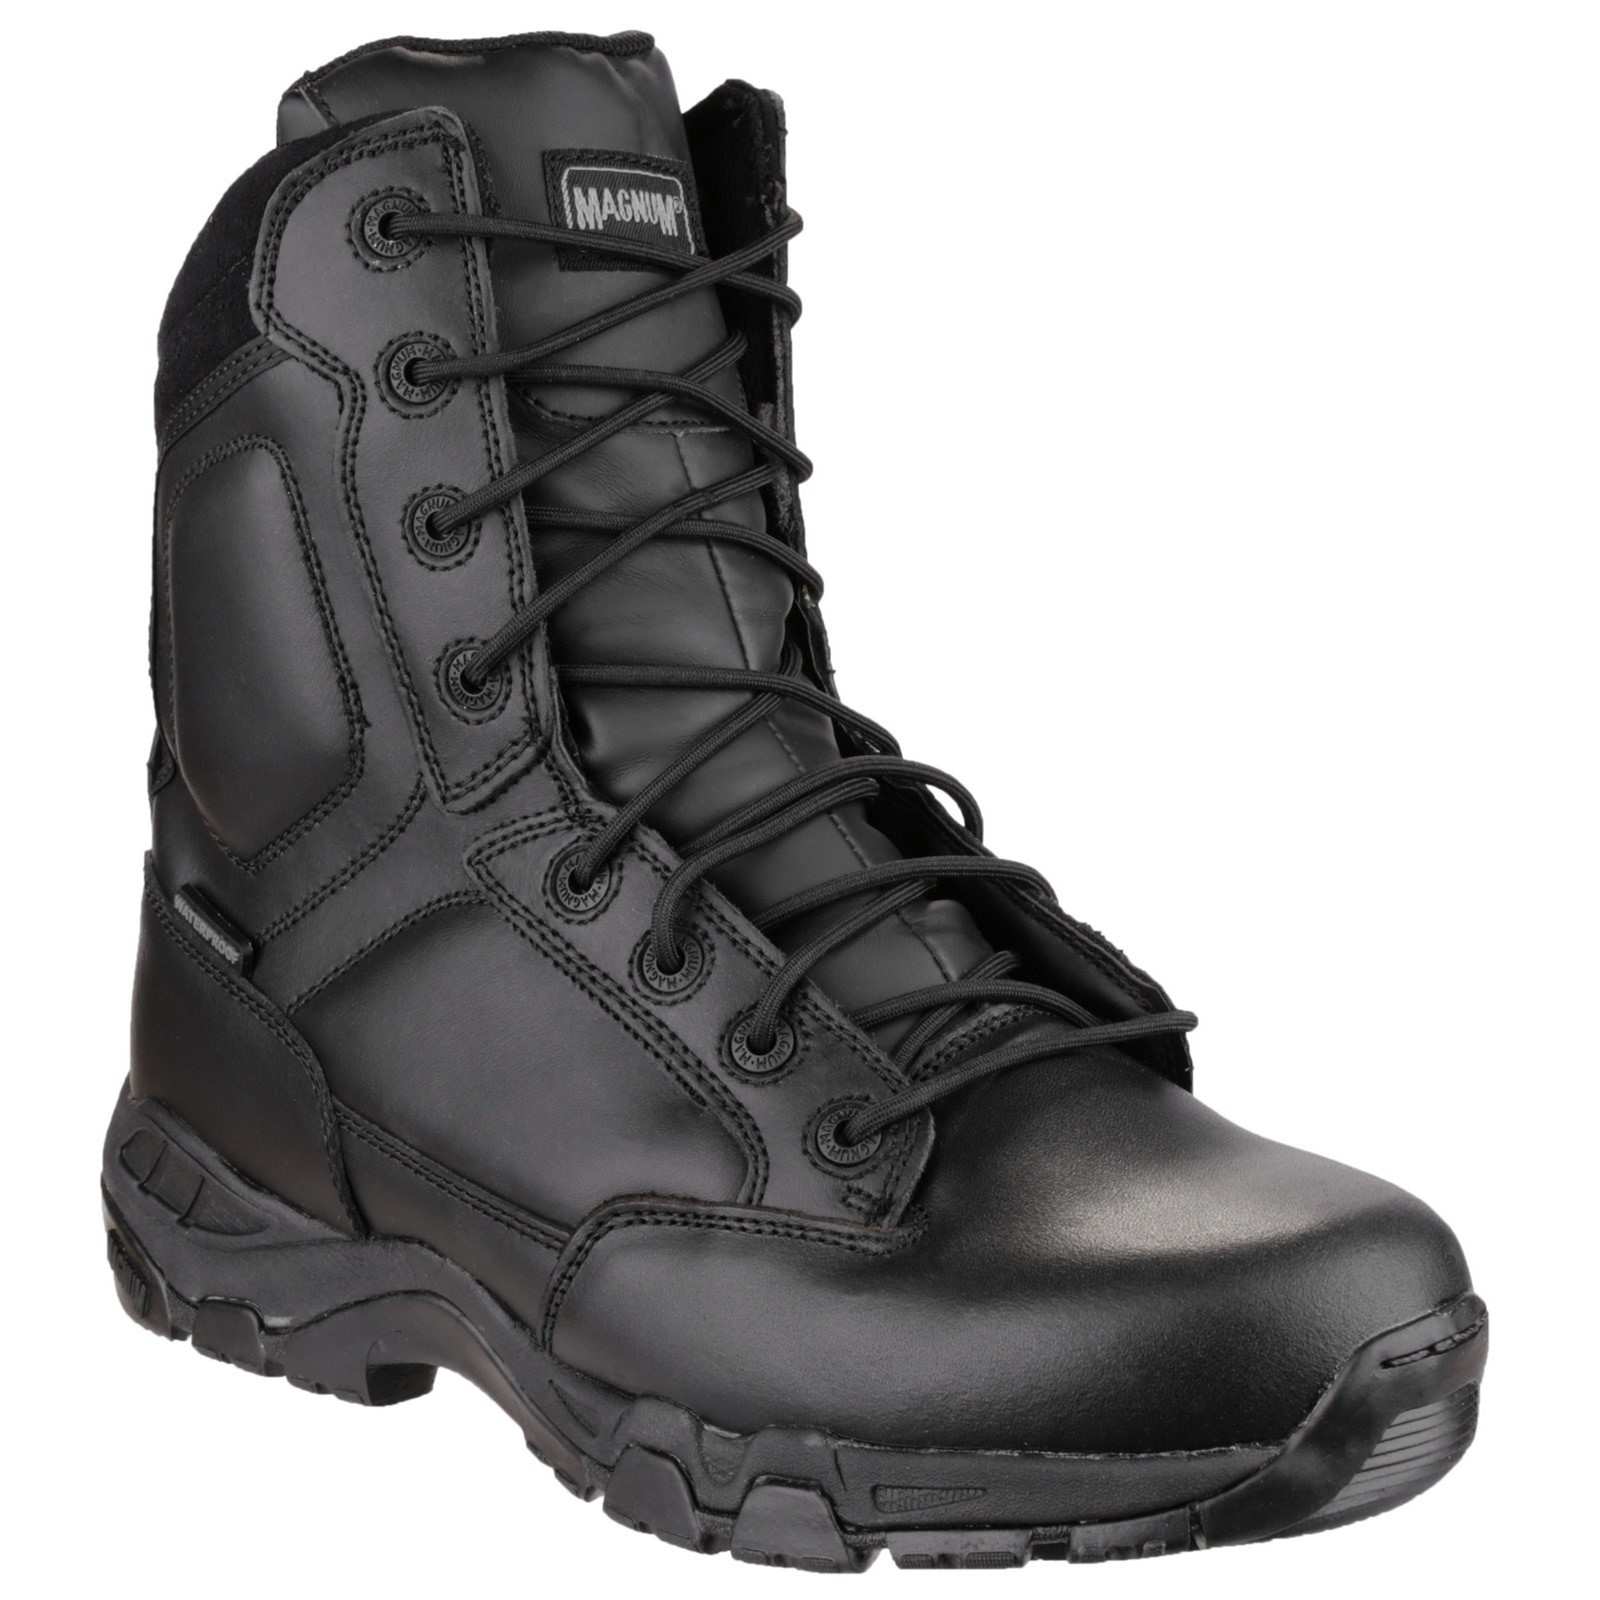 Viper Pro 8.0 Waterproof Lace Up Safety Boot